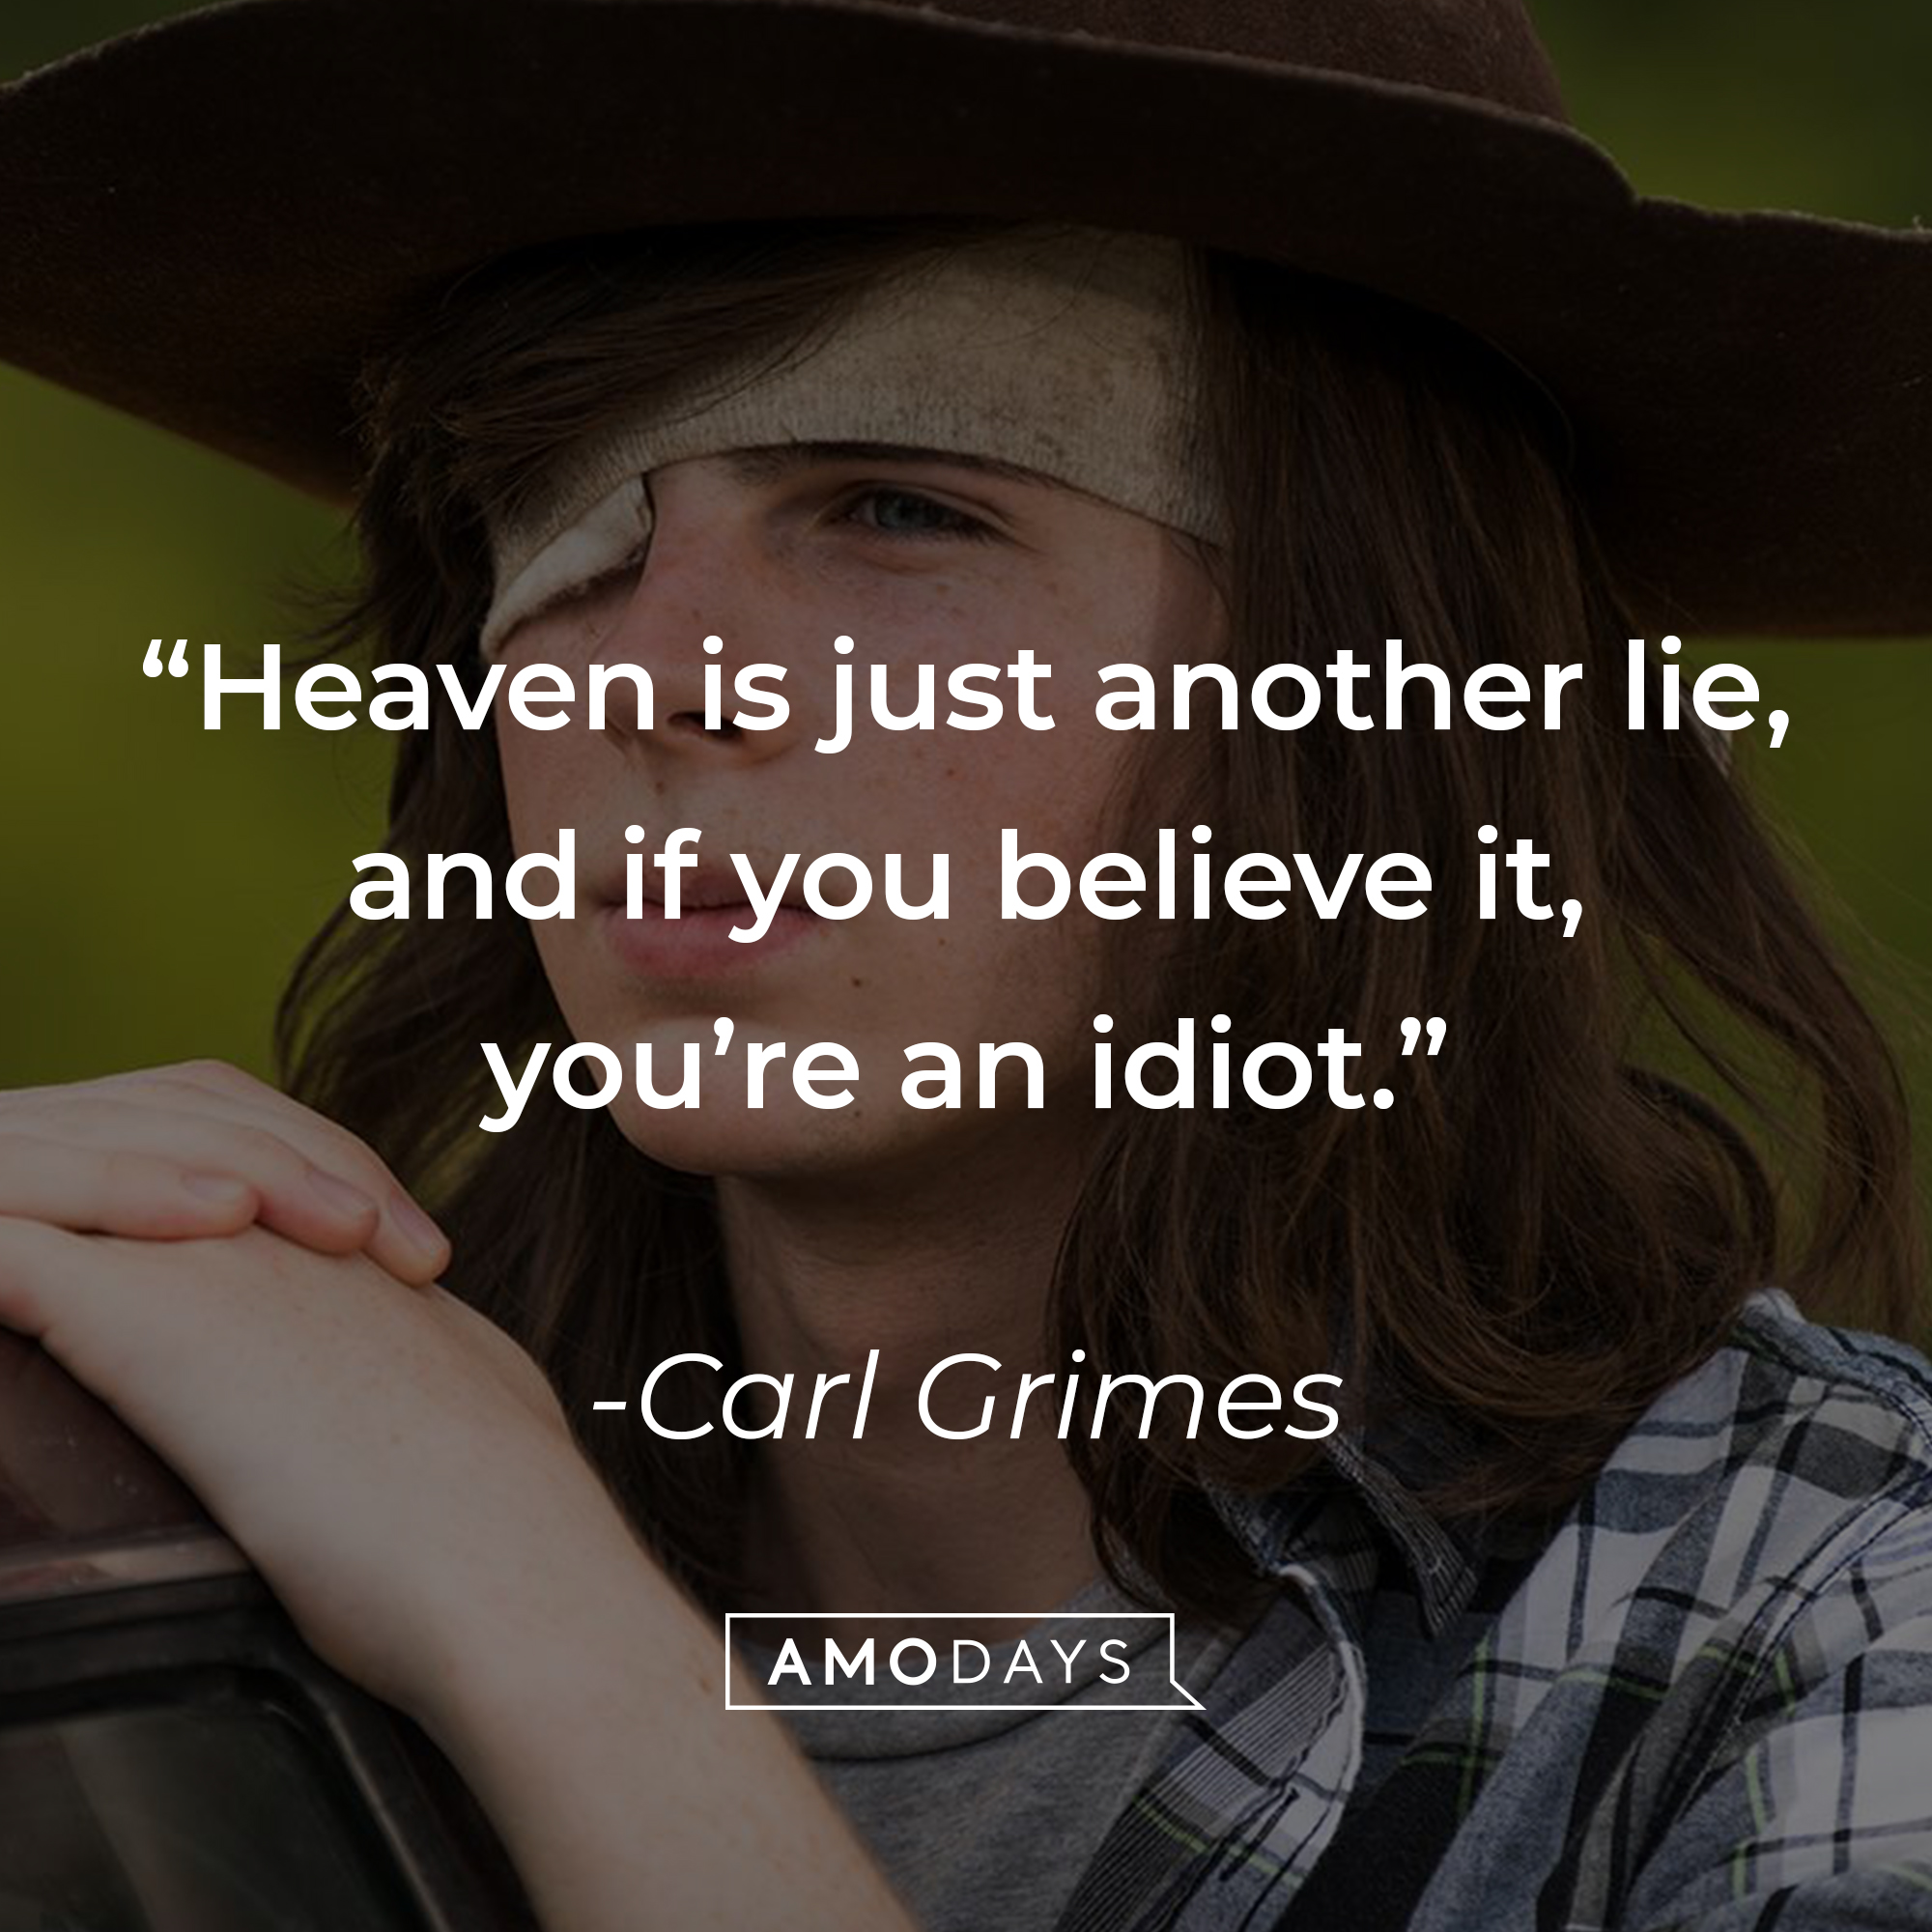 Carl Grimes,  with his quote“Heaven is just another lie, and if you believe it, you’re an idiot.”  | Source: facebook.com/TheWalkingDeadAMC